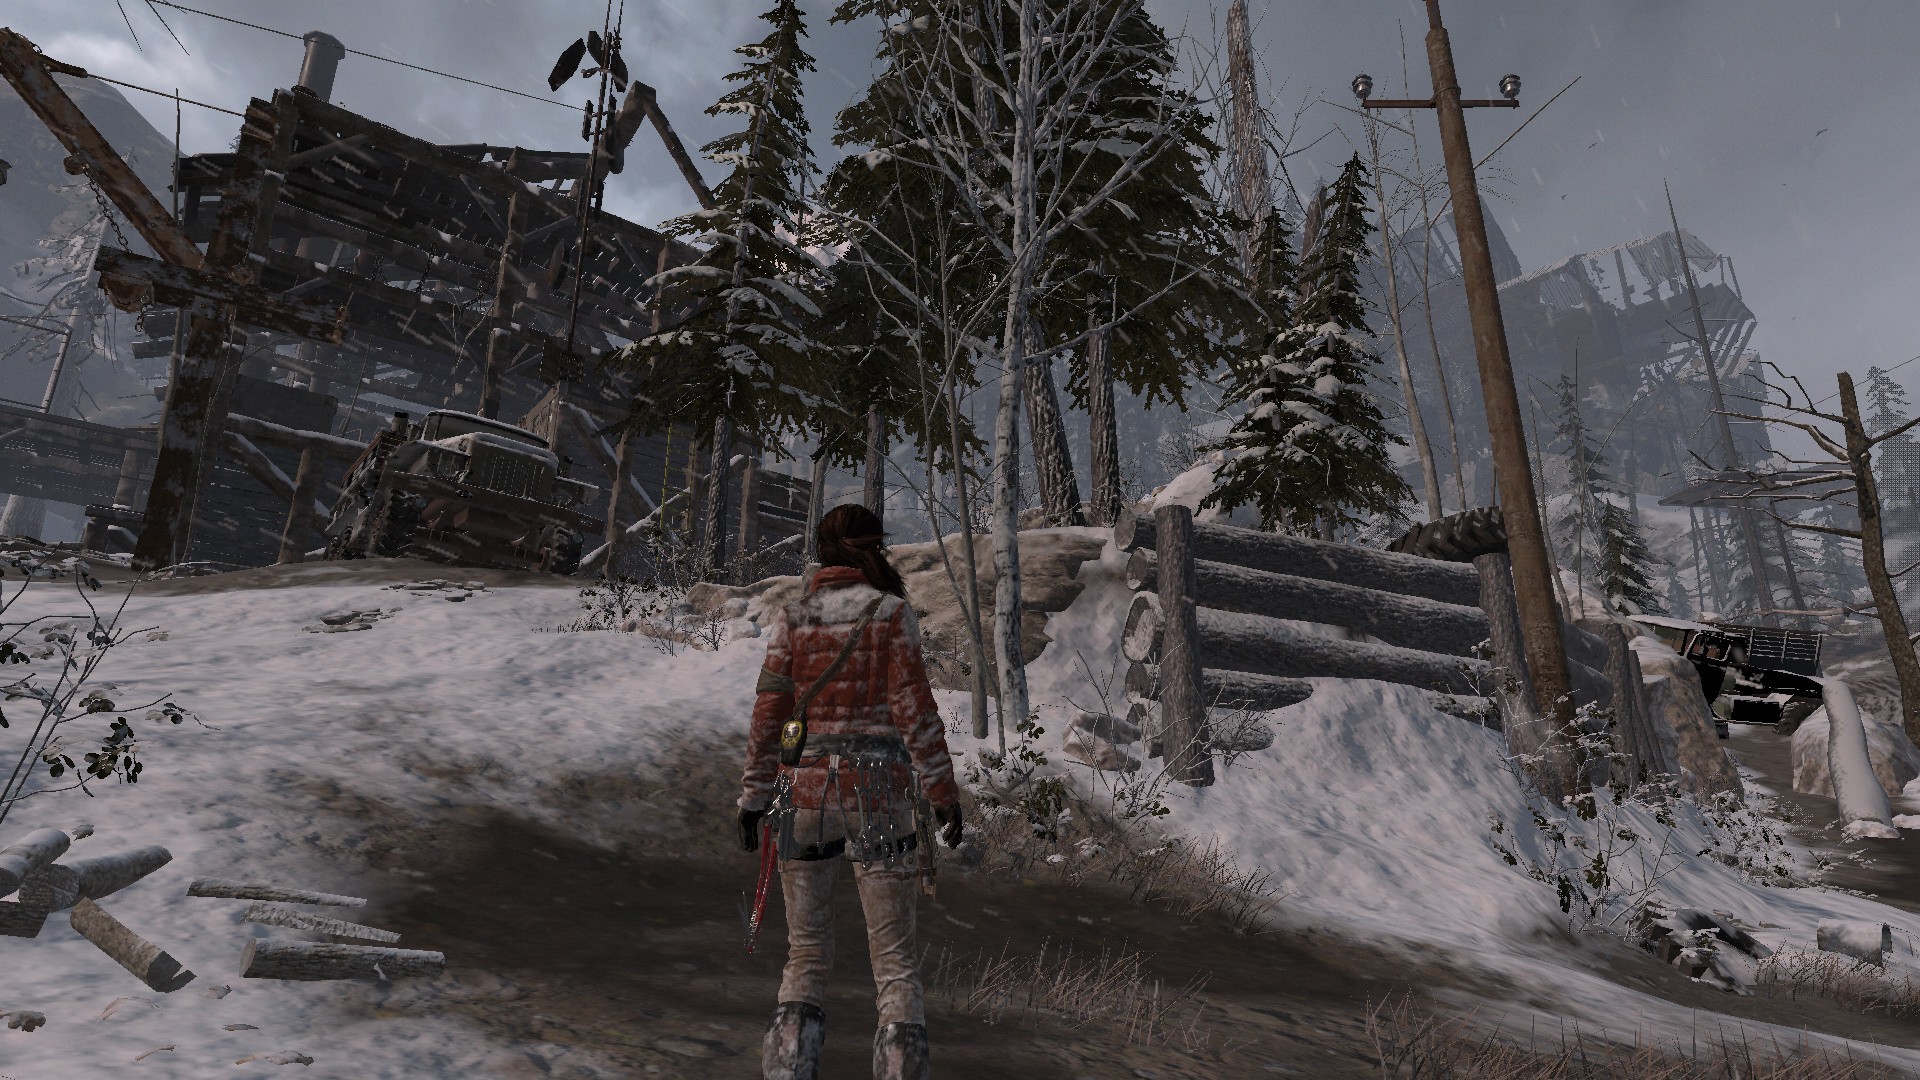 rise of the tomb raider pc version